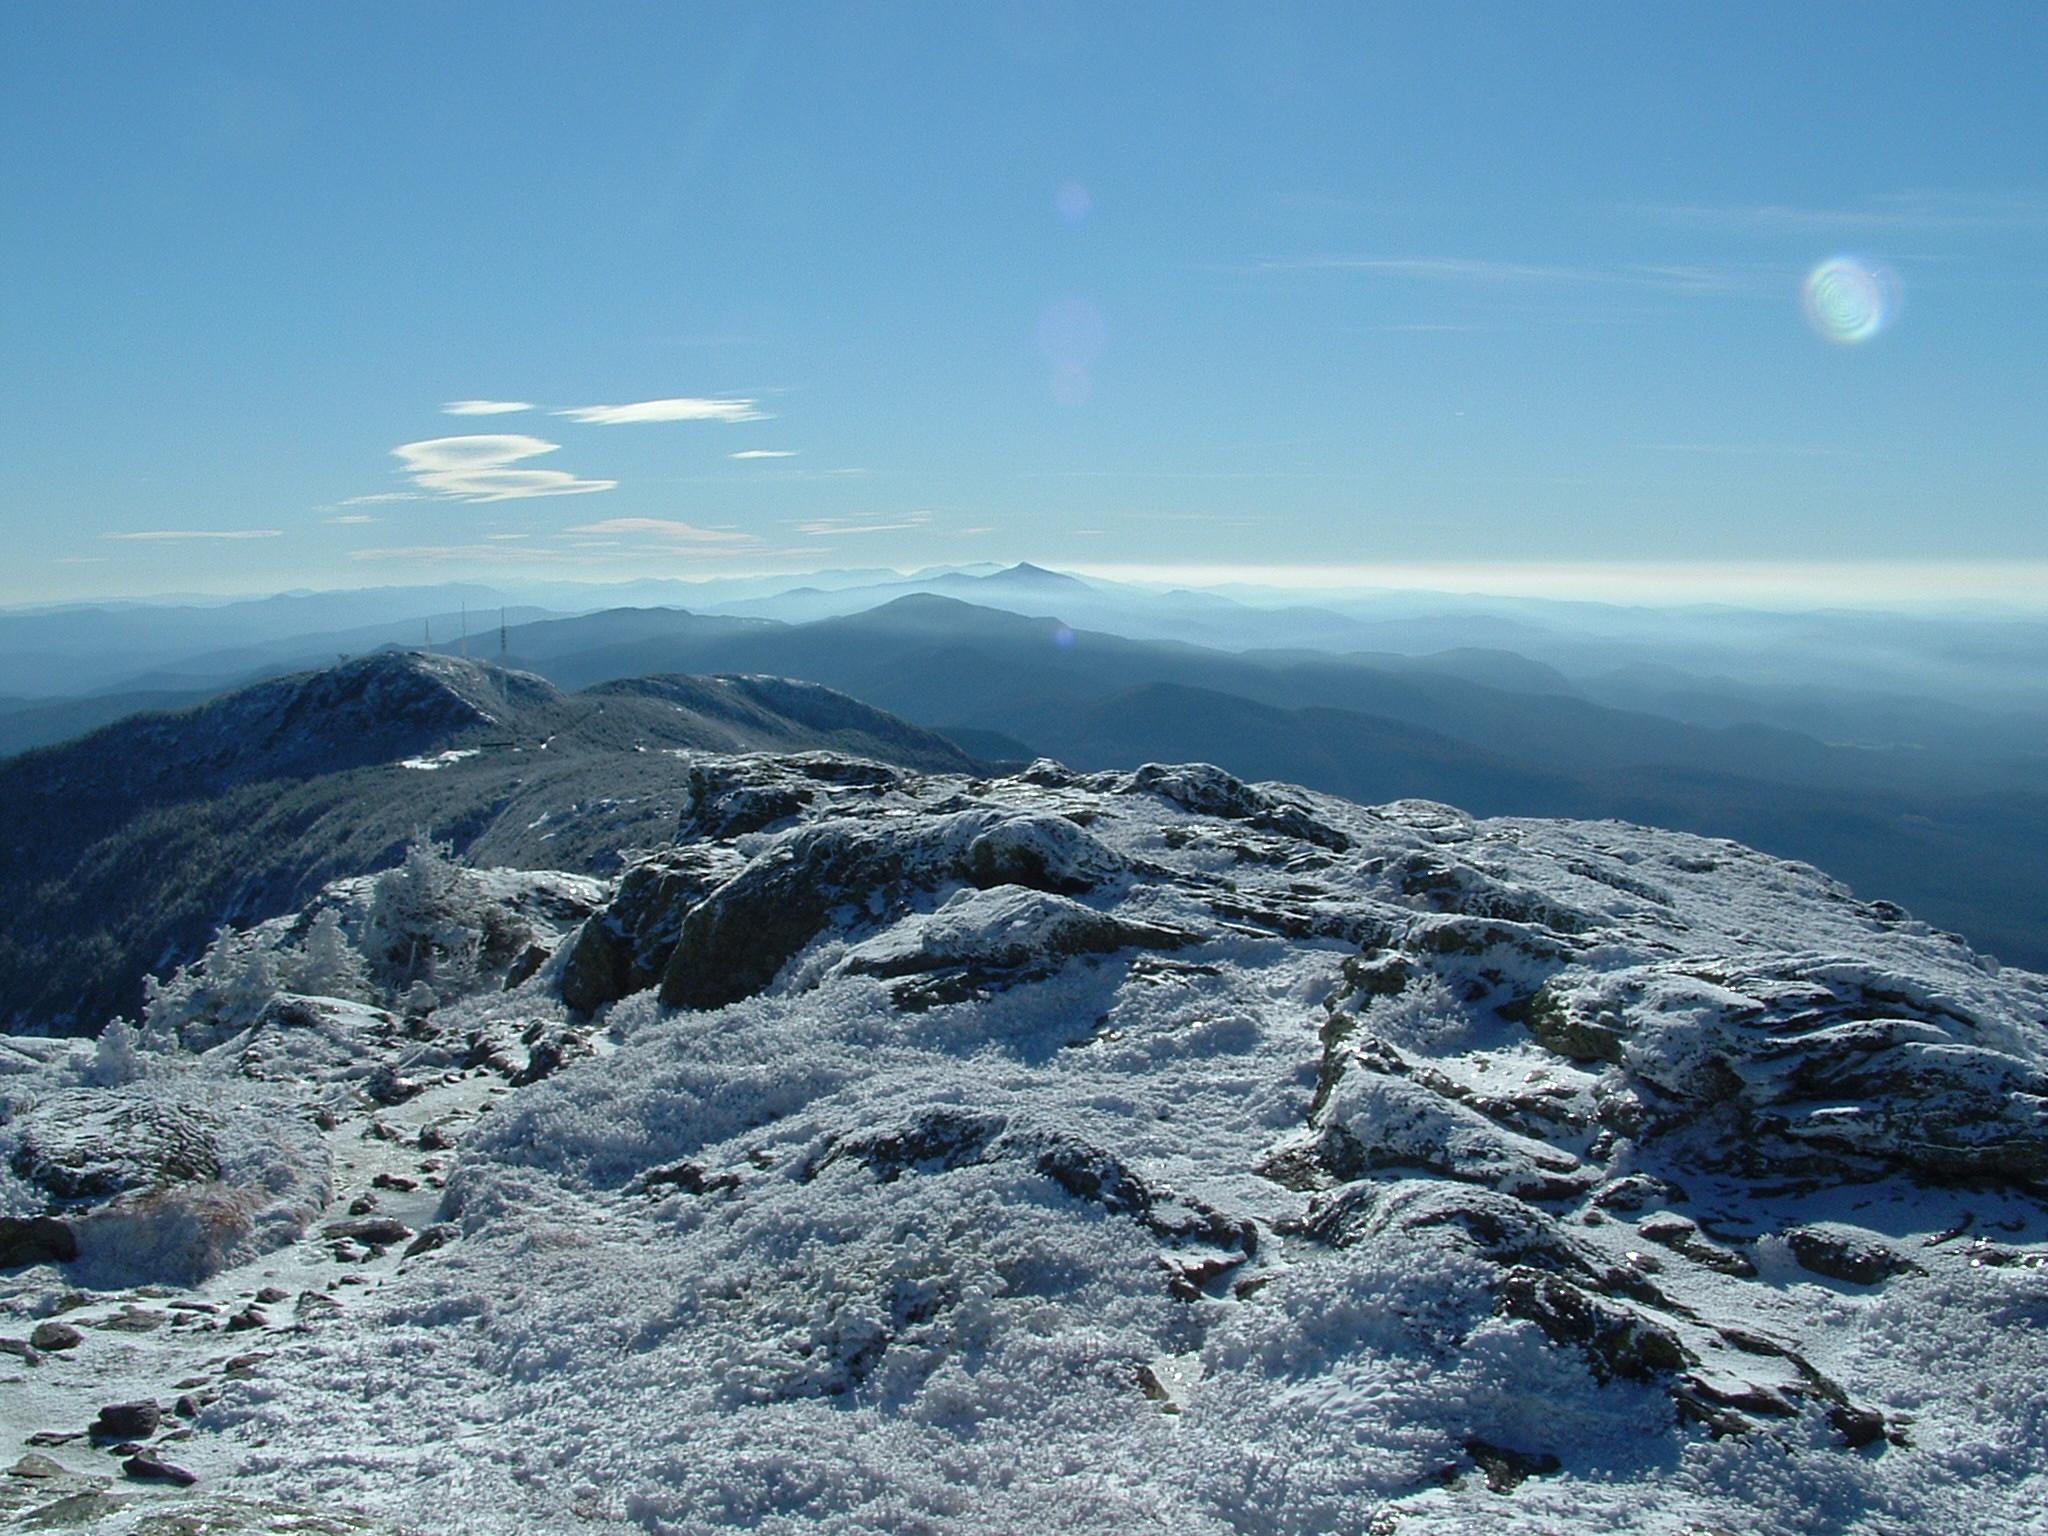 Mt. Mansfield Nov. 2006 (user submitted)